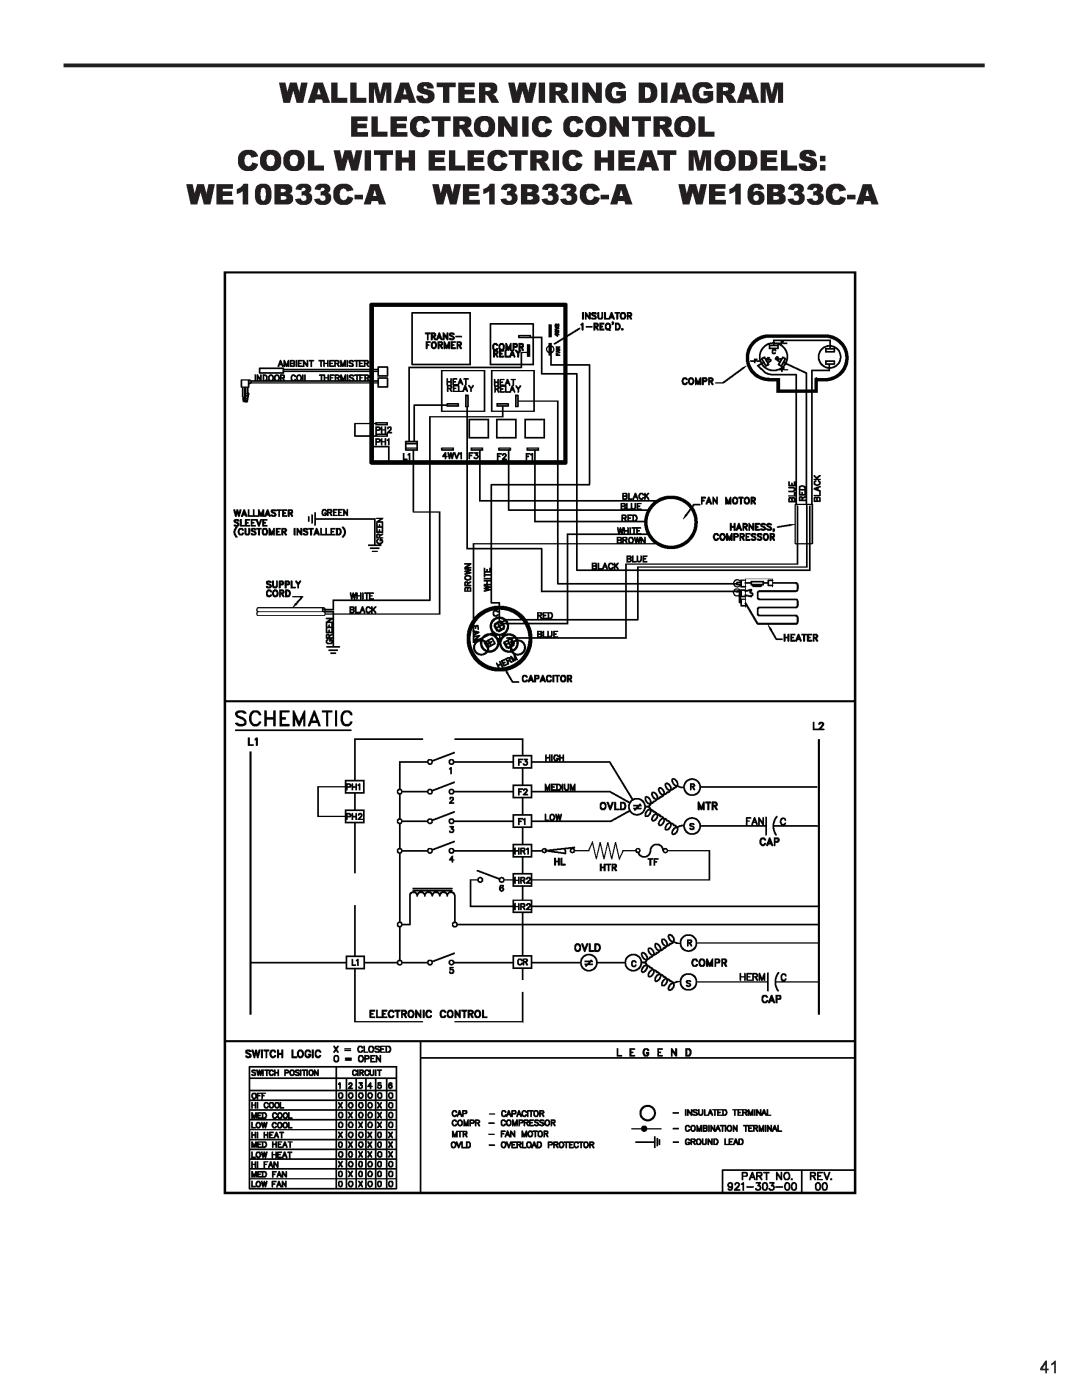 Friedrich 2009, 2008 service manual Cool With Electric Heat Models, WE10B33C-A WE13B33C-A WE16B33C-A 